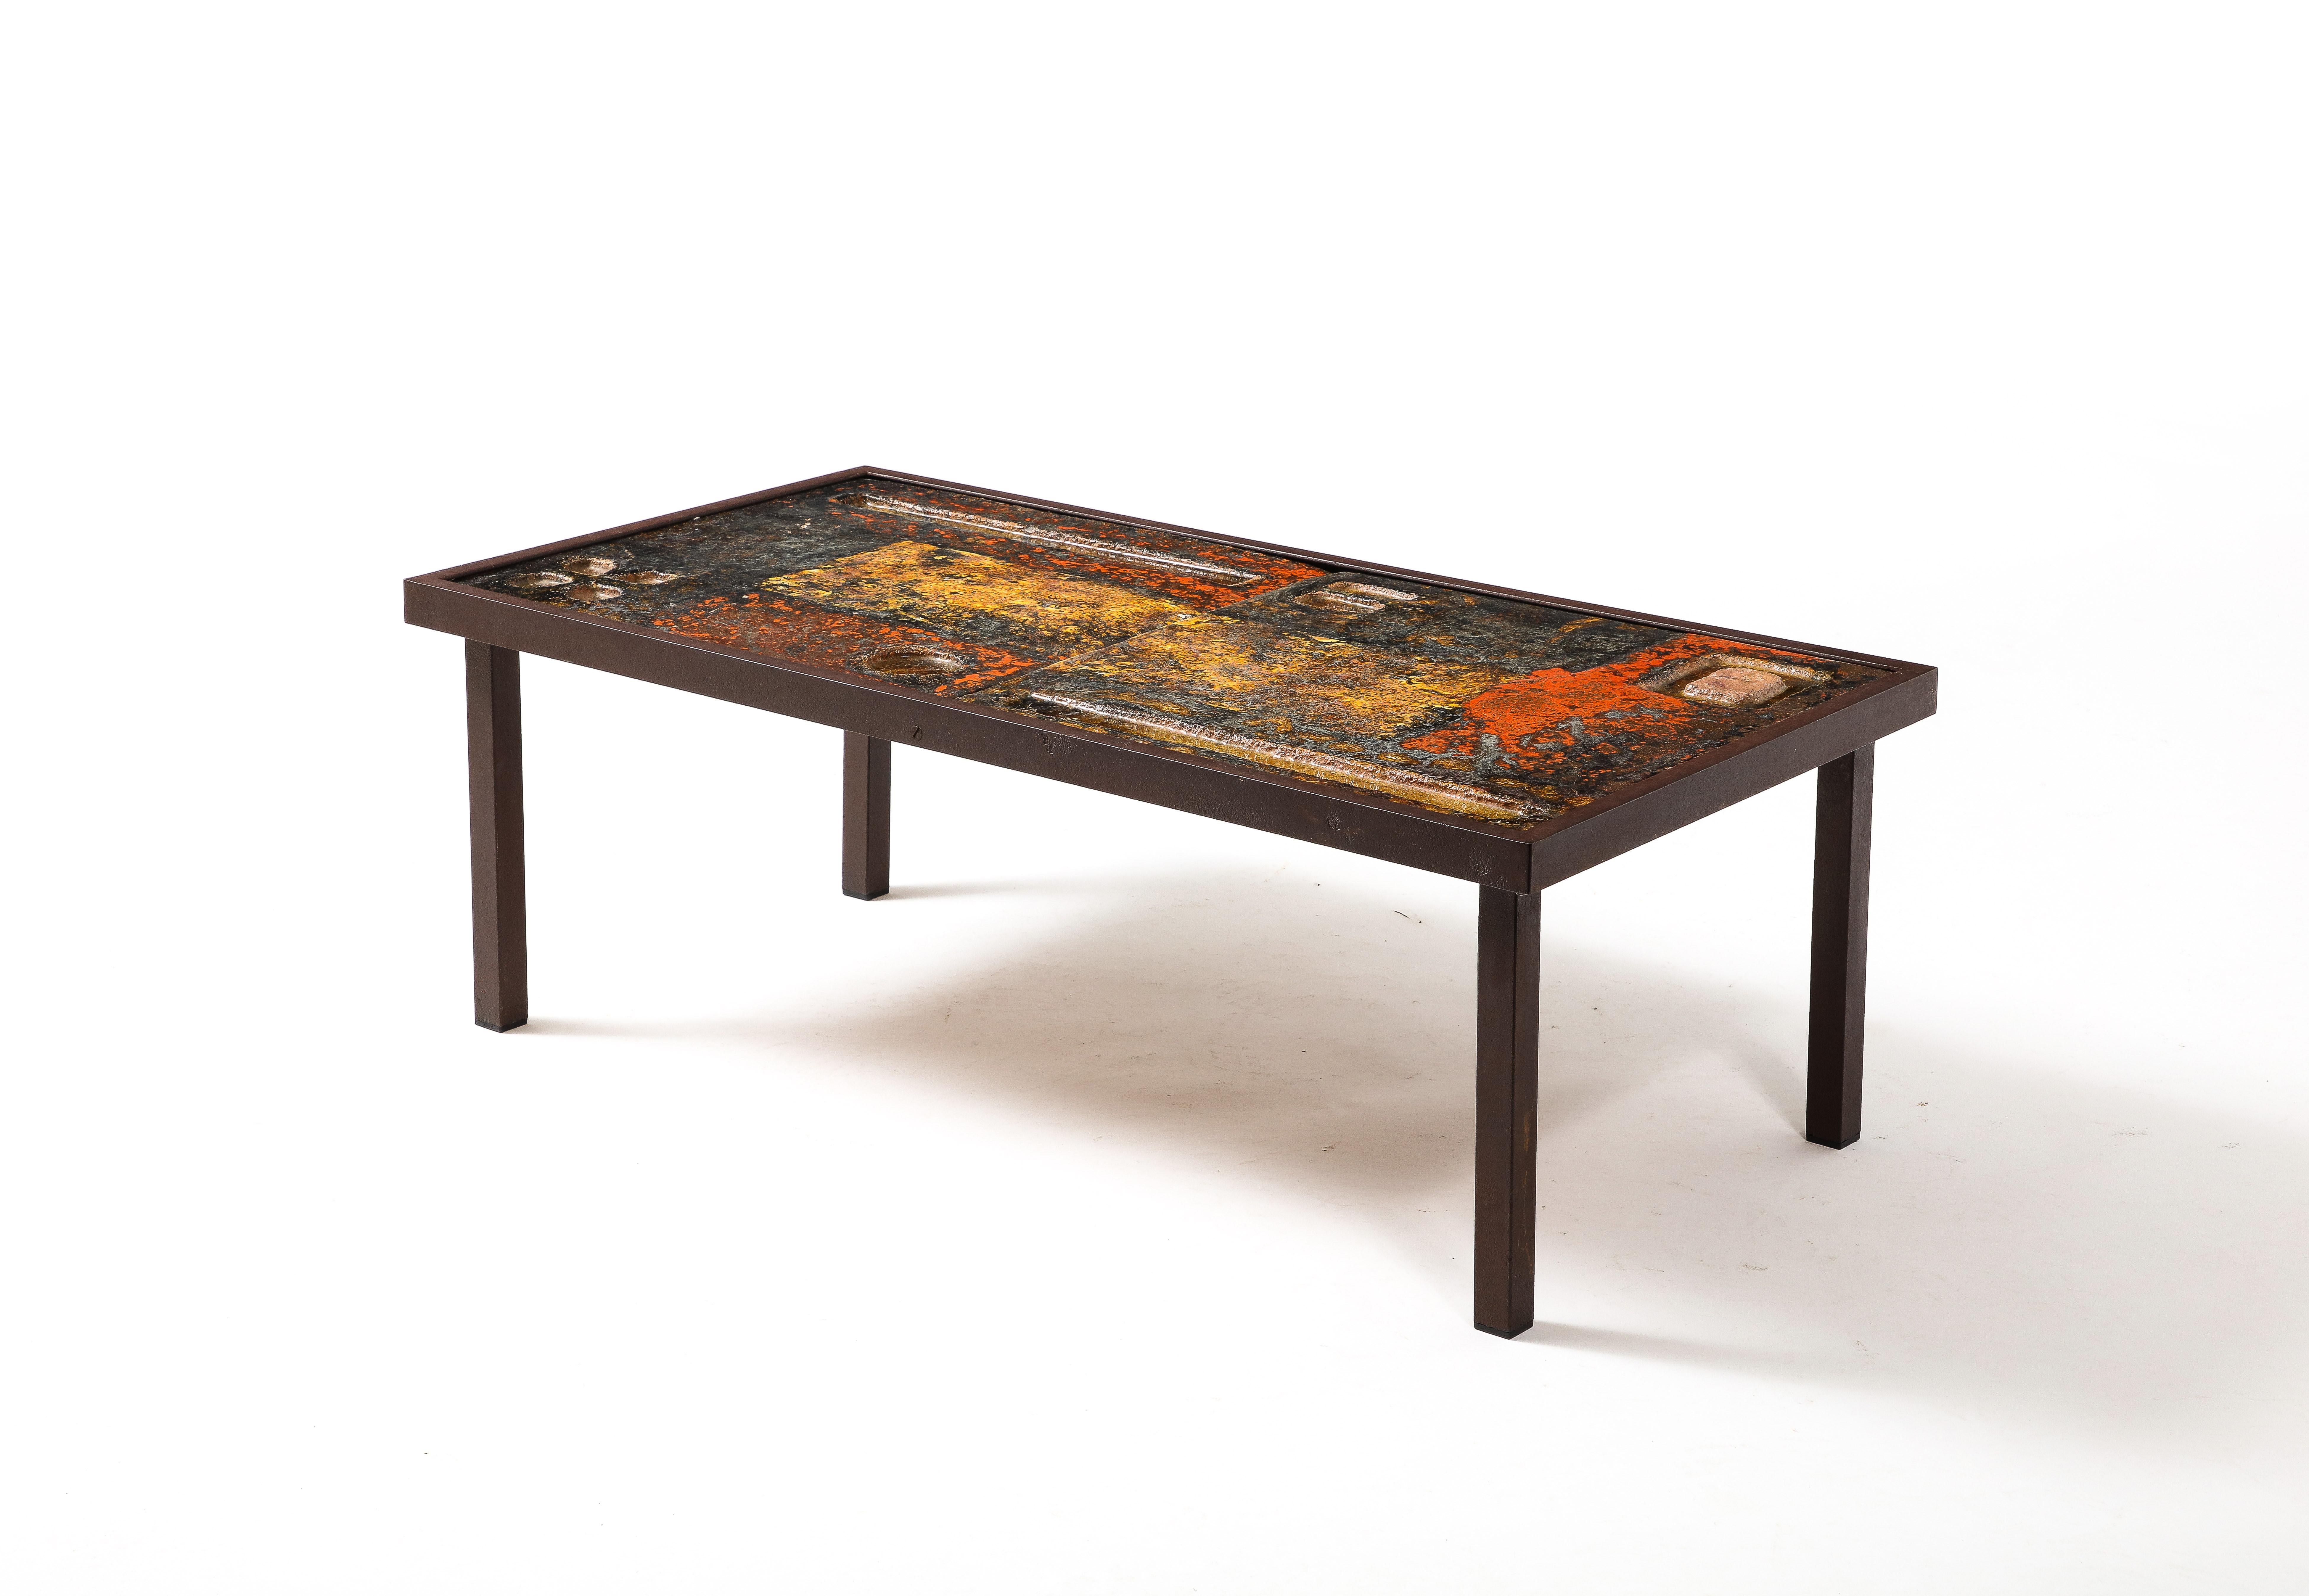 Enameled lava table with fused glass inlays on a patinated steel base.
